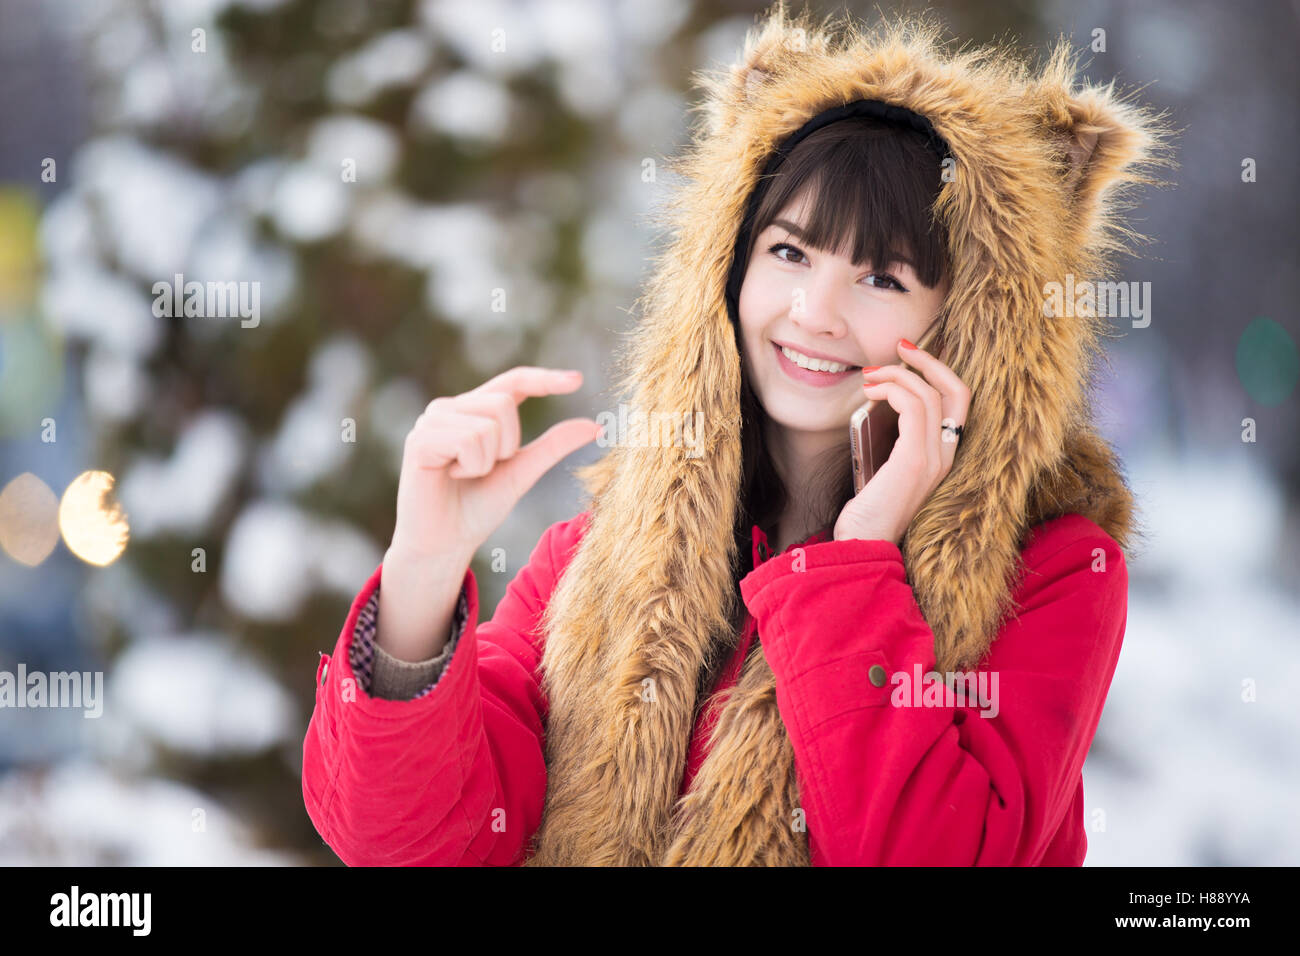 Young woman with smartphone gesturing small amount of something Stock Photo